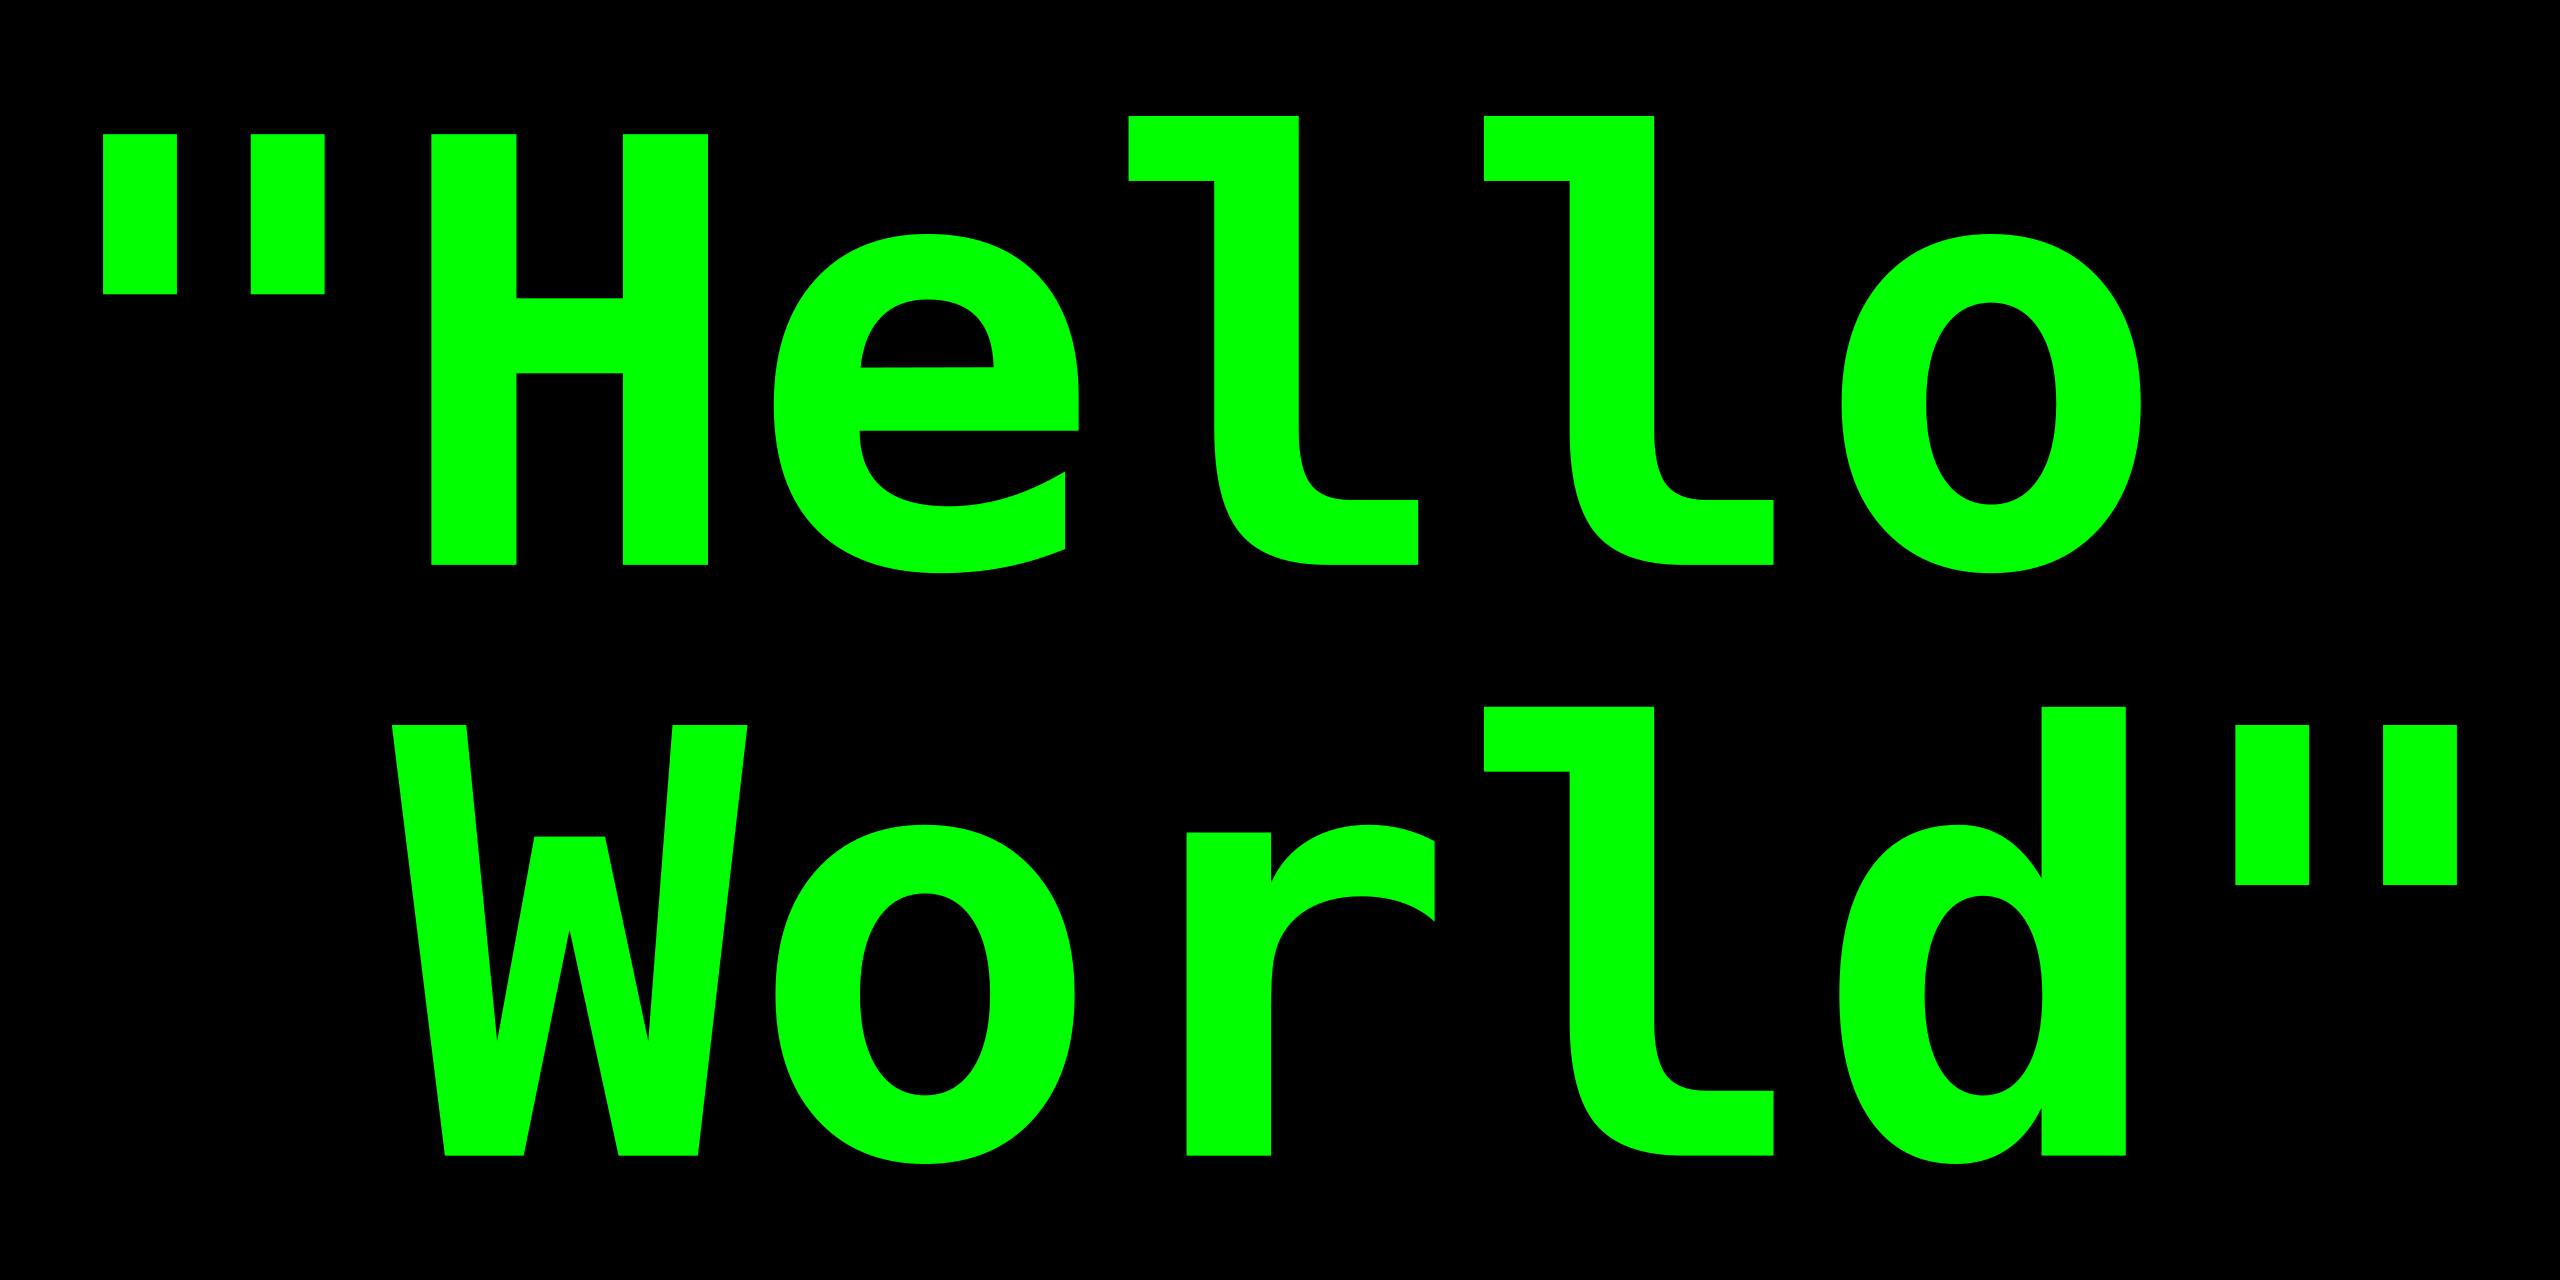 The words "Hello World" in neon green on a black background.